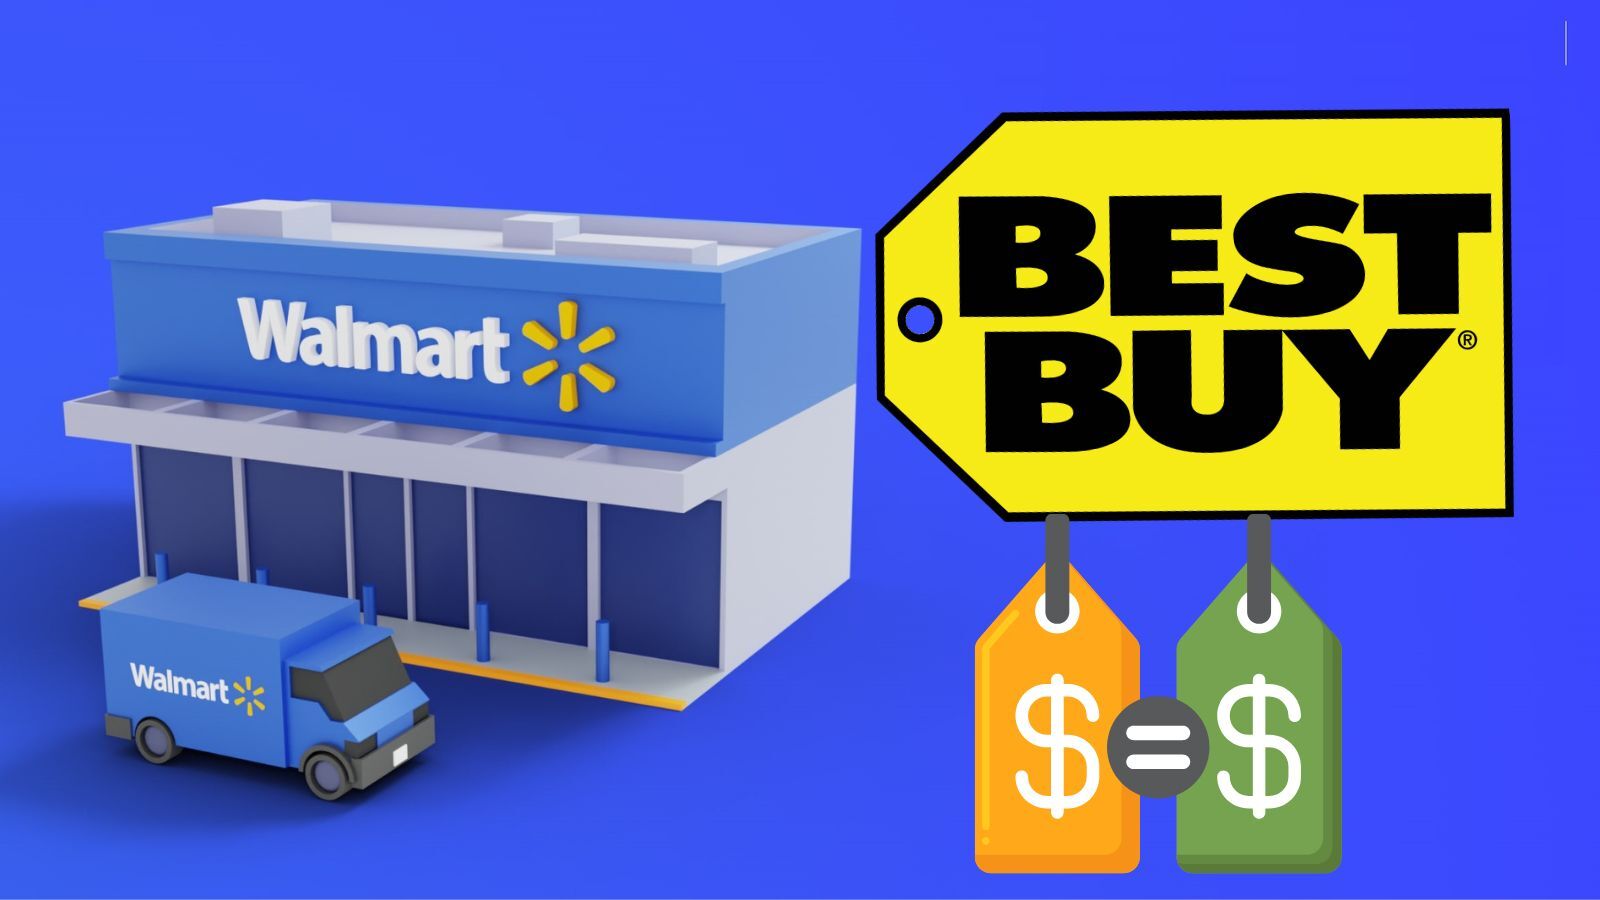 Does Walmart Price Match Best Buy? (A Full Guide)